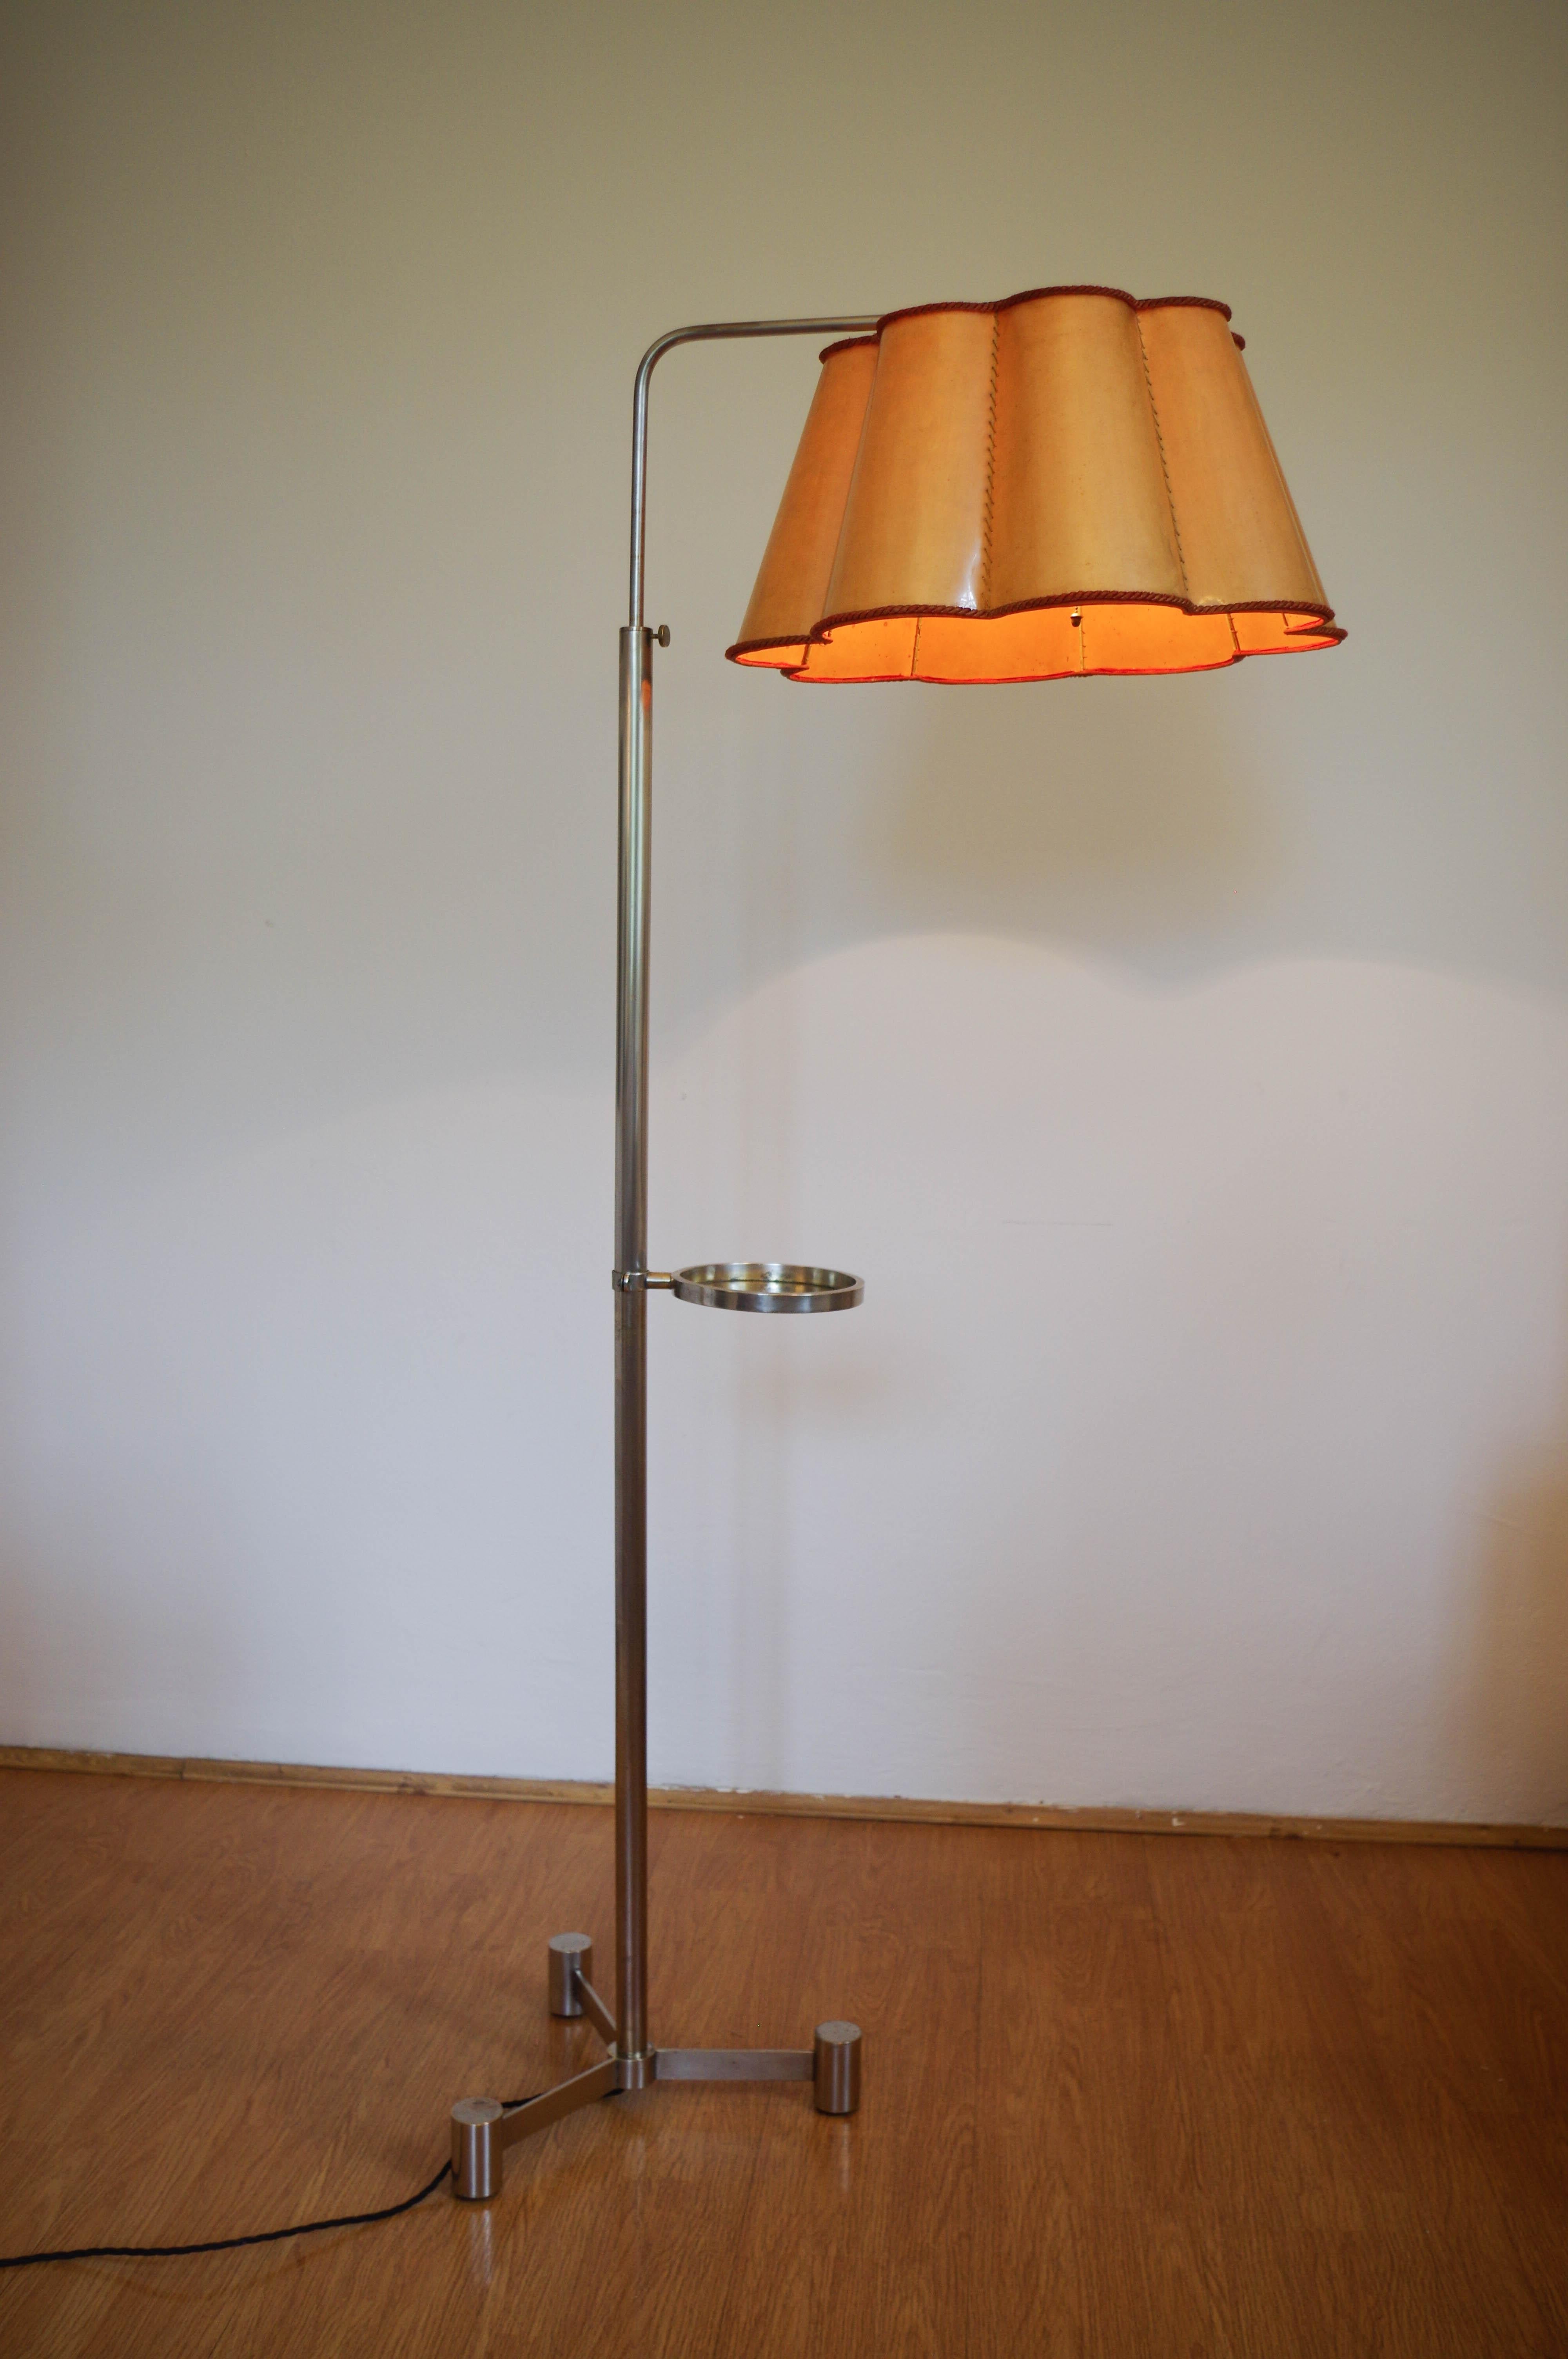 Simple and elegant nickel-plated floor lamp.
Adjustable height - 168cm - 190cm
Adjustable small round table.
Nickel plated tripod stand with age patina - cleaned and polished.
Original two-layer (paper and plastic) shade with no cracks.
Rewired: